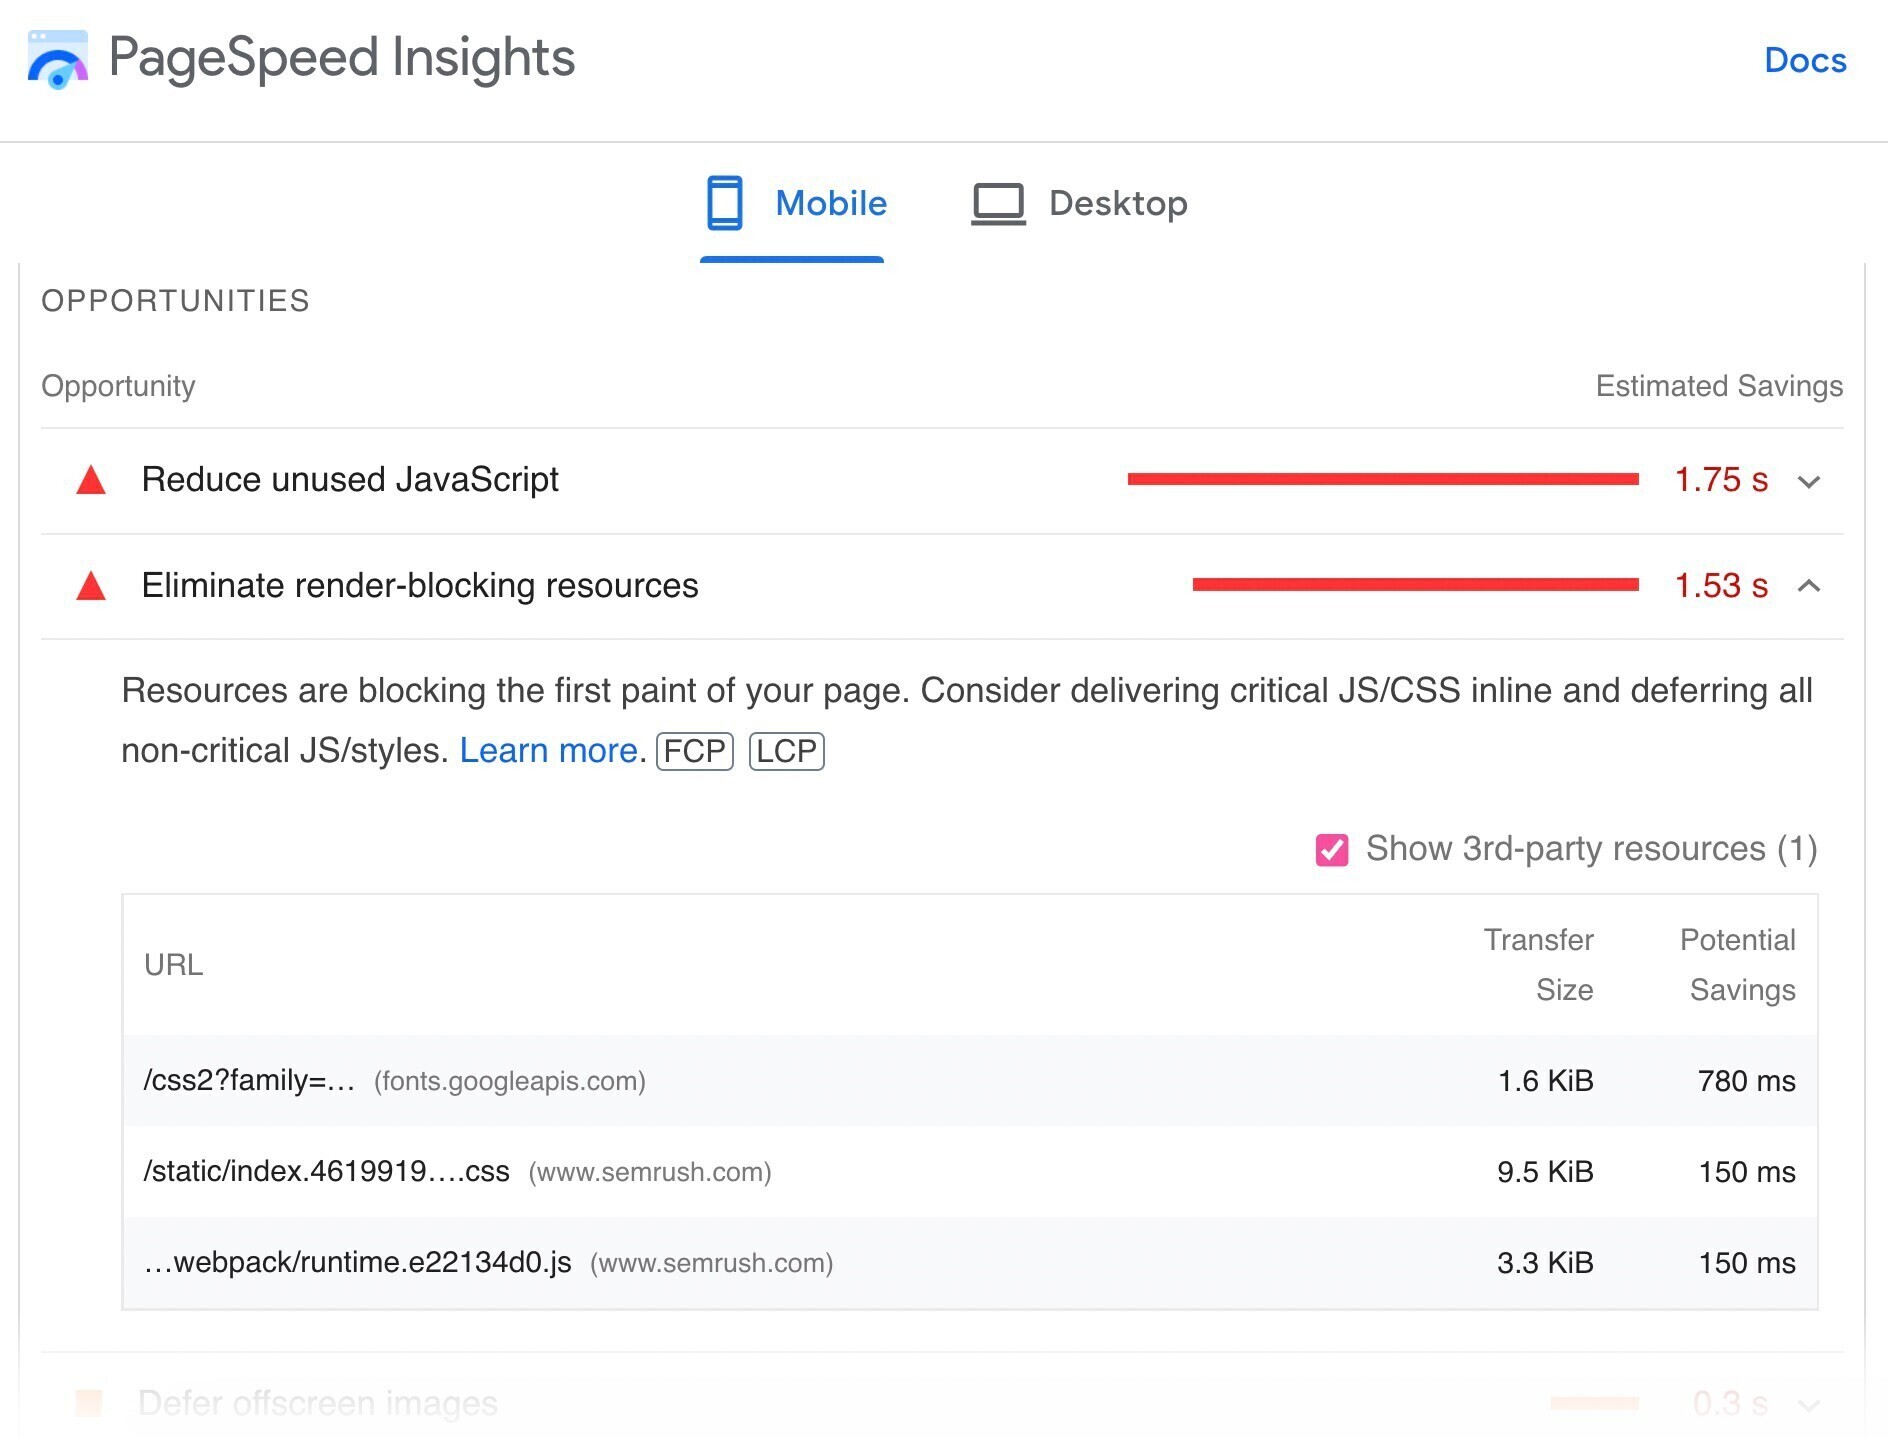 page speed insights tool mobile opportunities